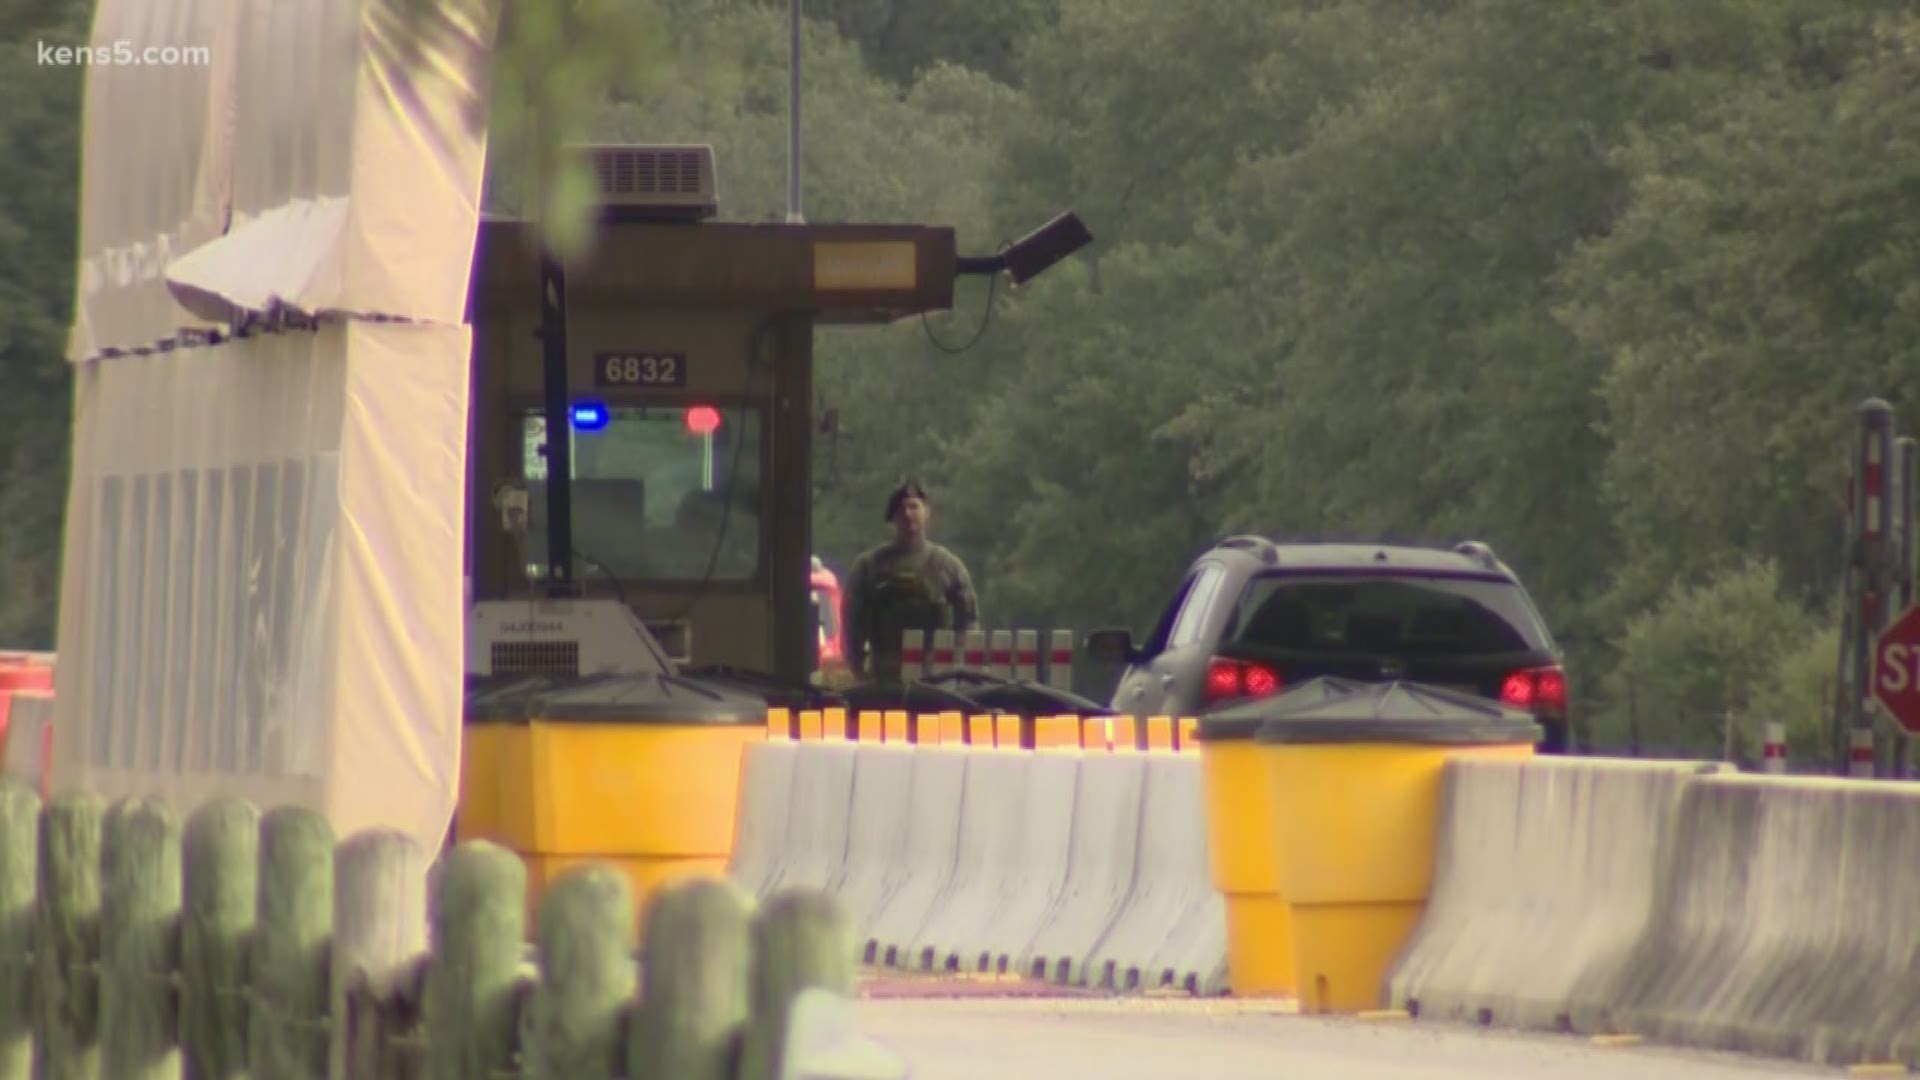 Little information has been provided about why Camp Bullis went into lockdown early Thursday morning in San Antonio, but one person was arrested.